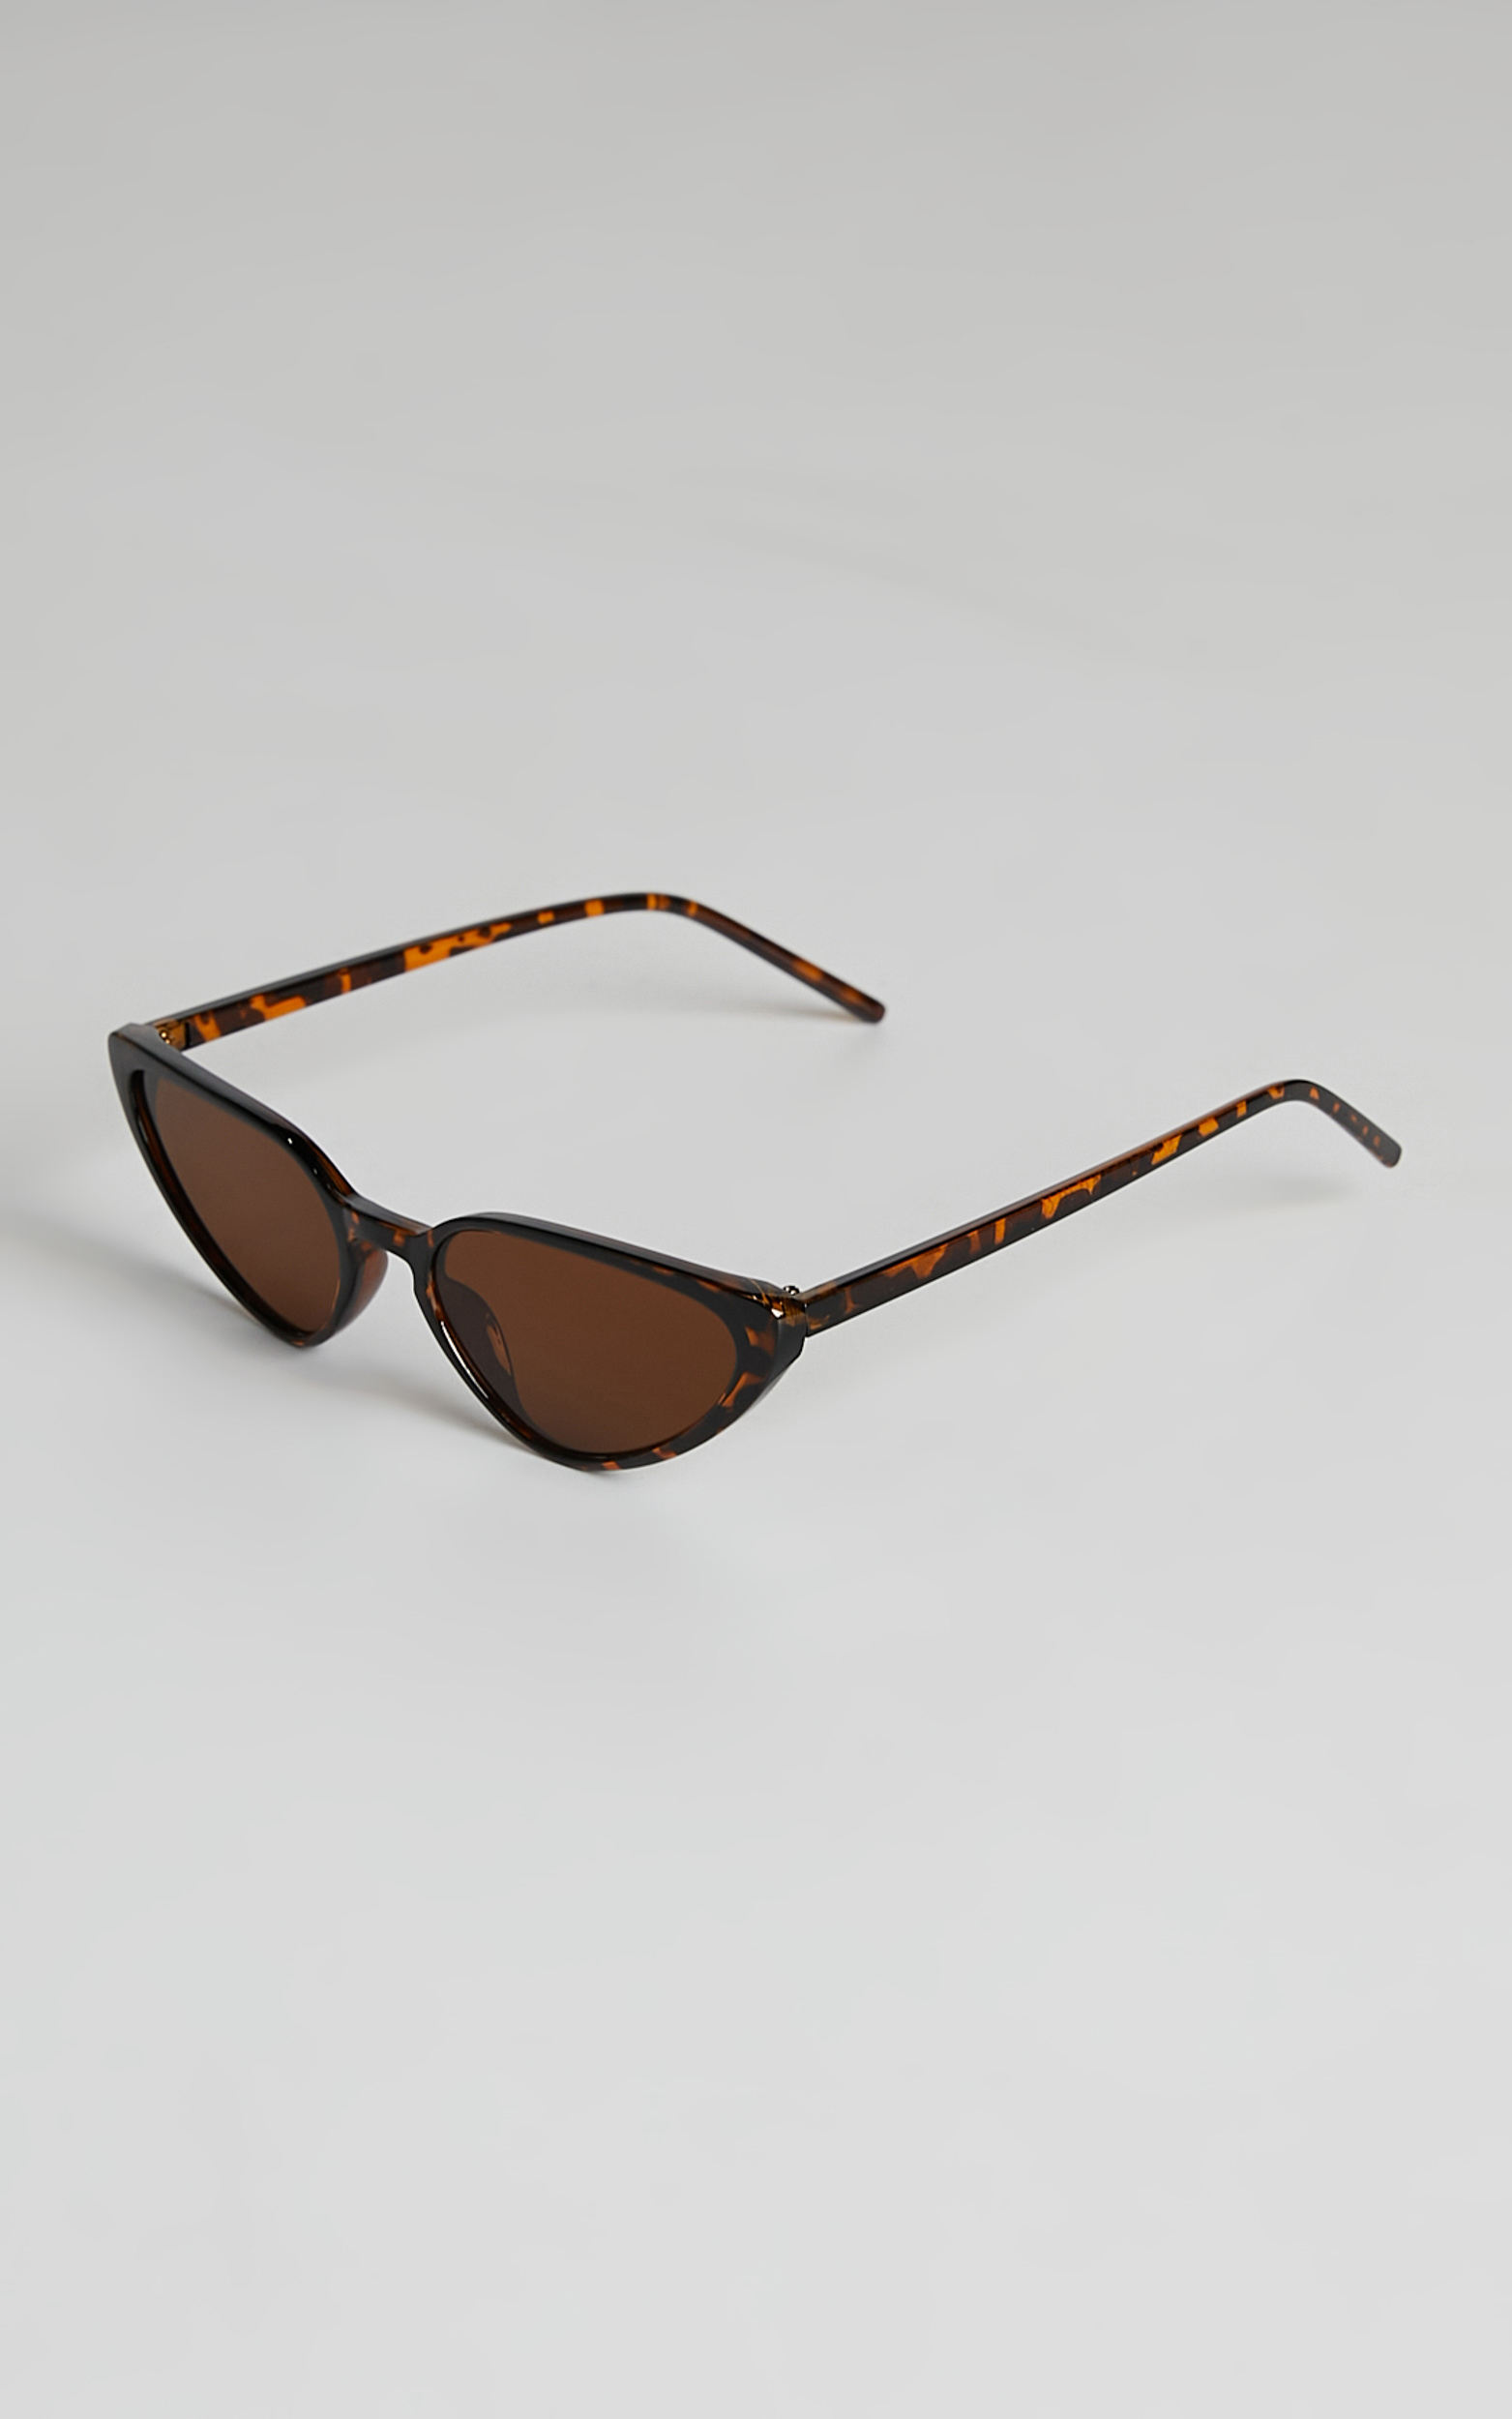 Marge Sunglasses in Tortoise Shell - NoSize, NEU2, hi-res image number null